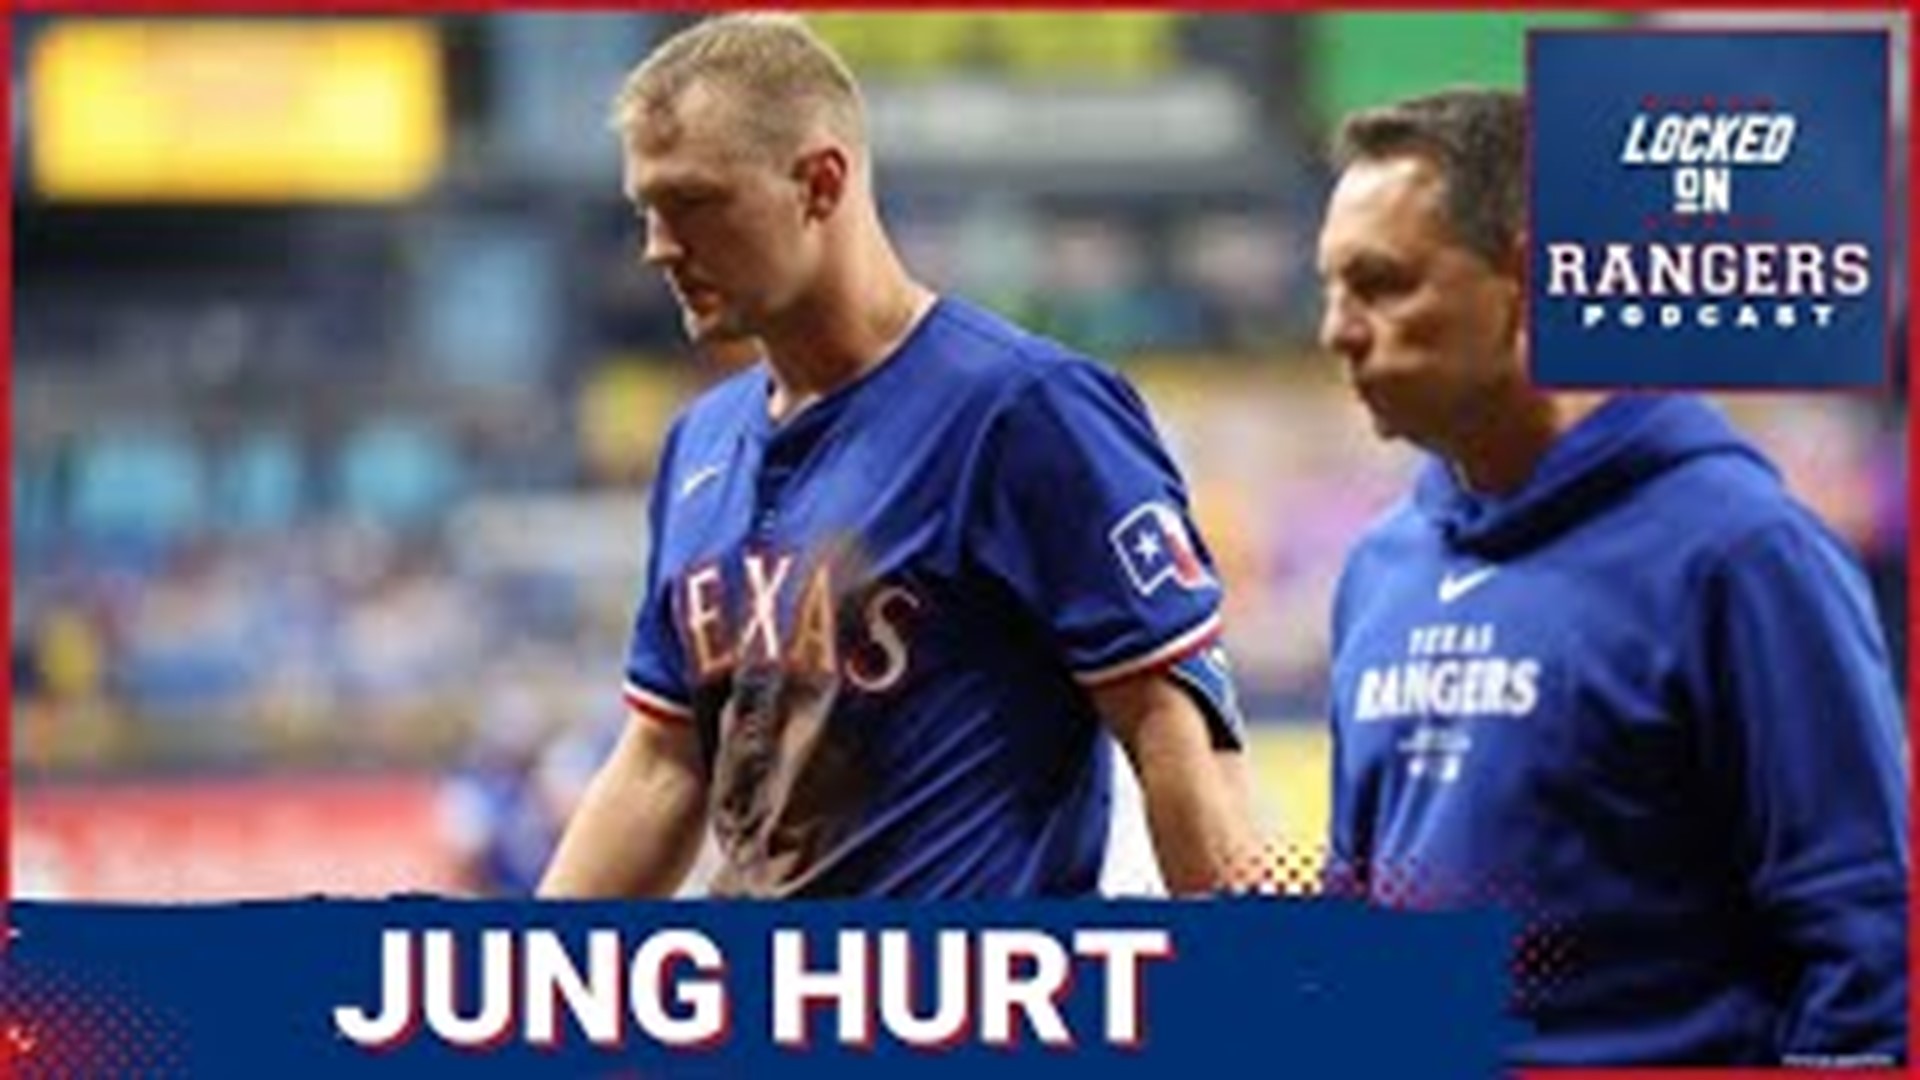 The Texas Rangers beat the Tampa Bay Rays but lost All-Star Josh Jung to a fractured wrist. Ezequiel Duran will likely need to step up big but this is a huge injury.